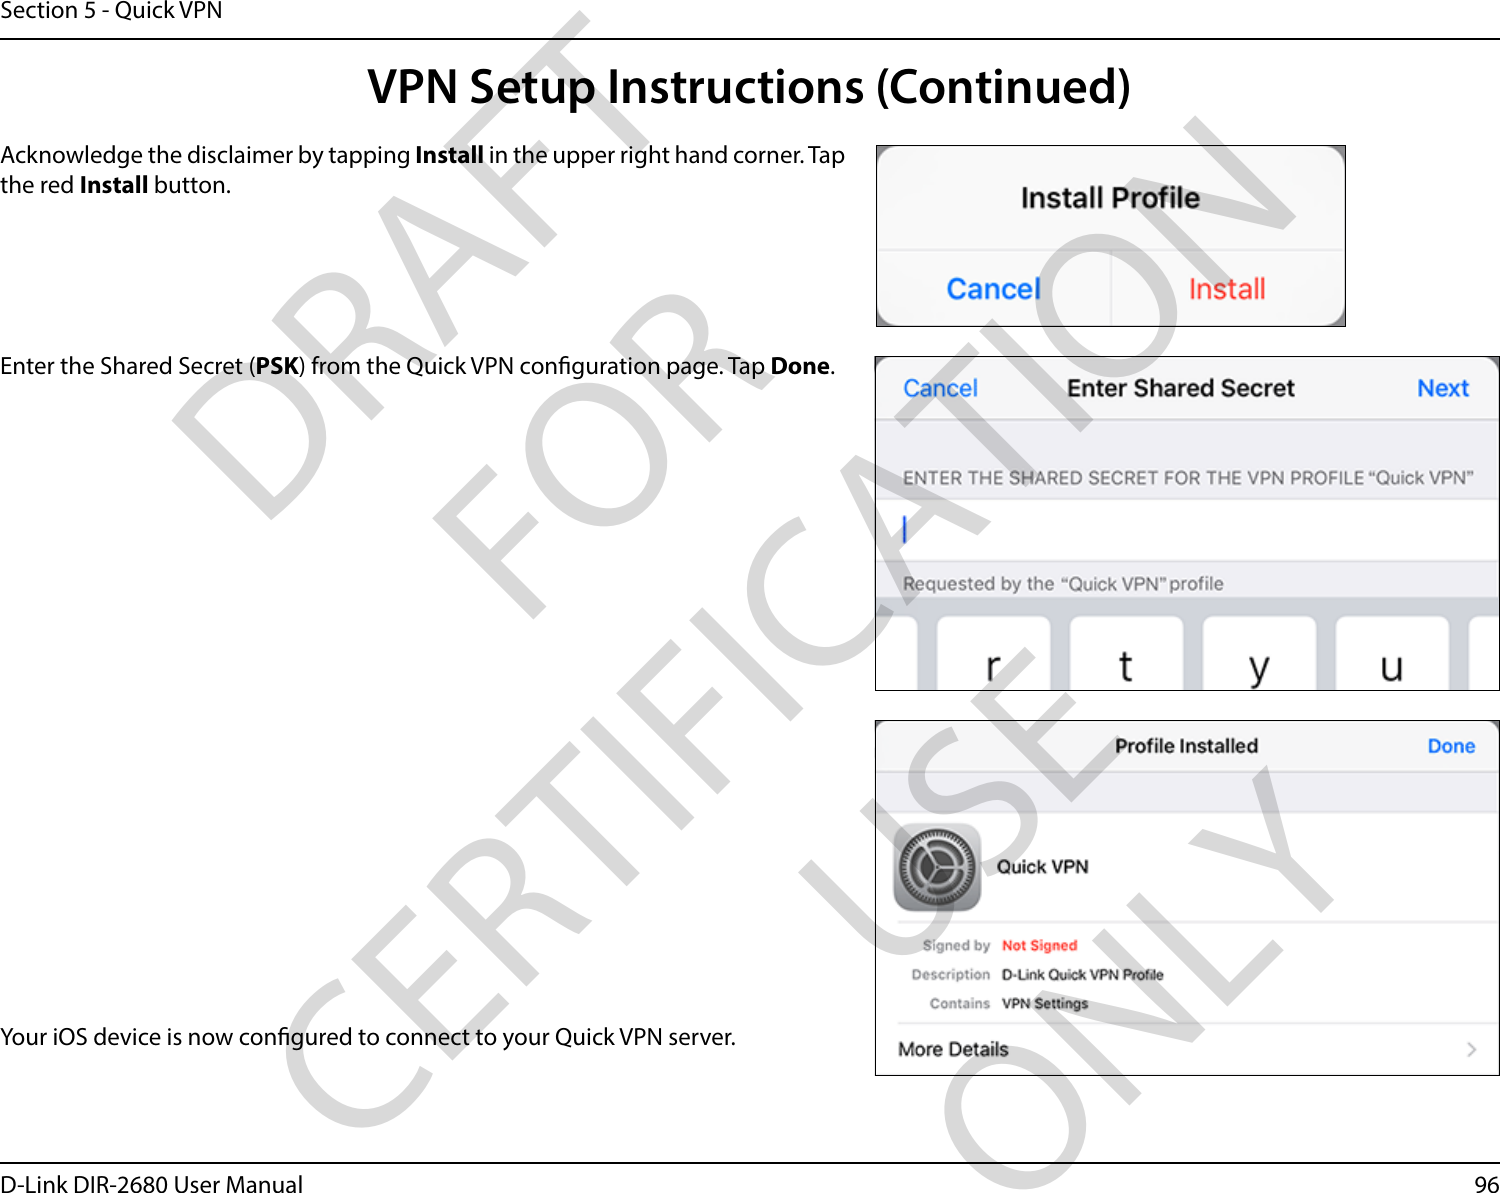 96D-Link DIR-2680 User ManualSection 5 - Quick VPNYour iOS device is now congured to connect to your Quick VPN server.Enter the Shared Secret (PSK) from the Quick VPN conguration page. Tap Done.Acknowledge the disclaimer by tapping Install in the upper right hand corner. Tap the red Install button.VPN Setup Instructions (Continued)DRAFT FOR CERTIFICATION USE ONLY